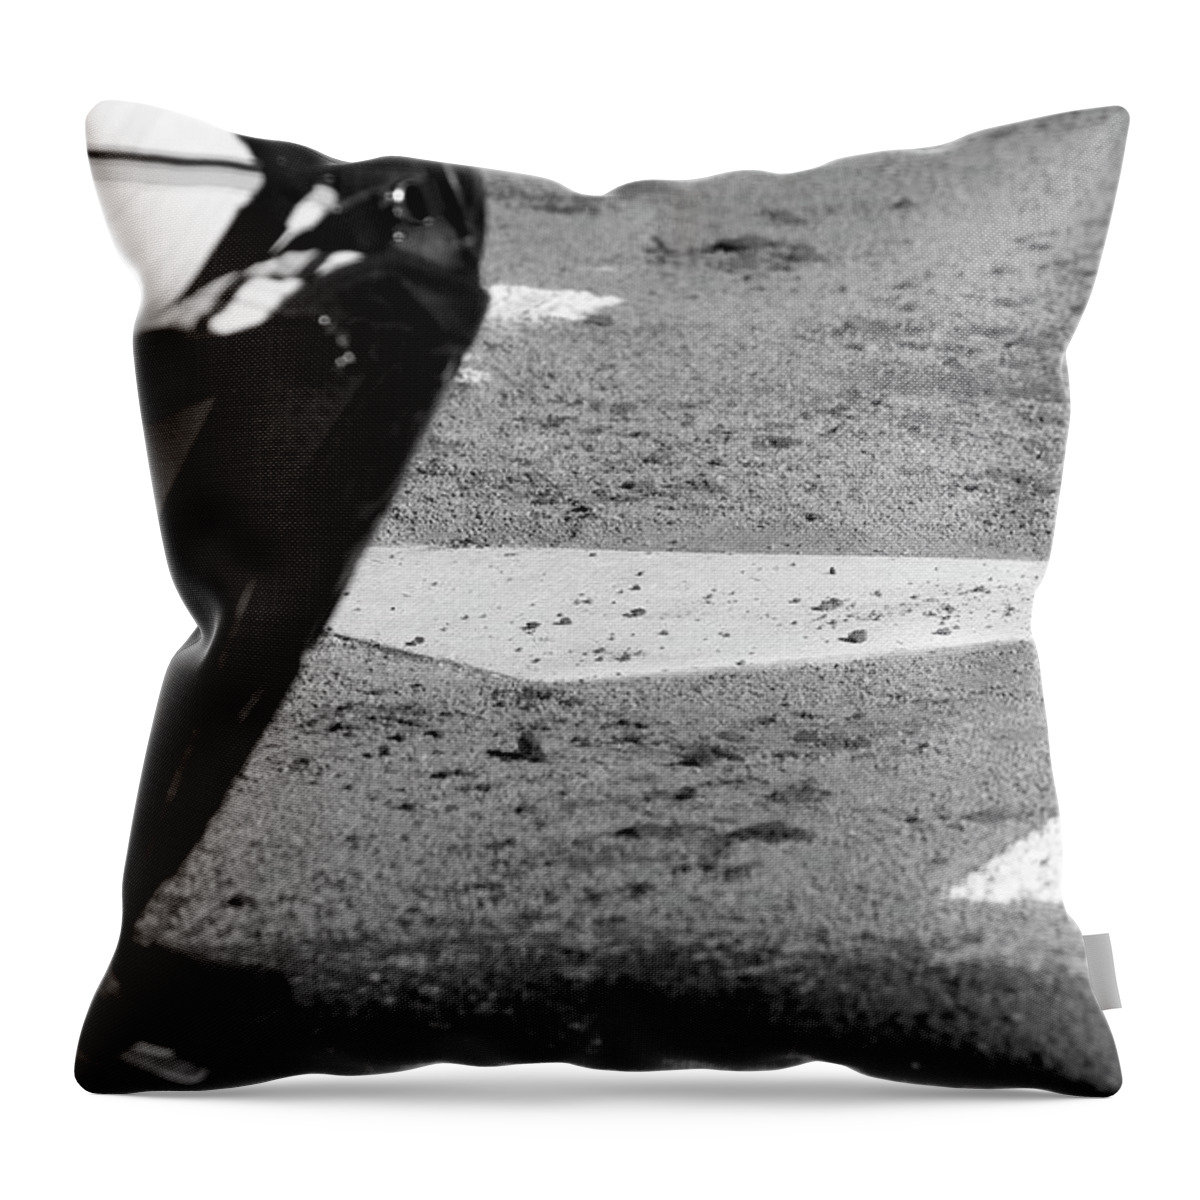 Home Throw Pillow featuring the photograph Homeland Security by Laddie Halupa